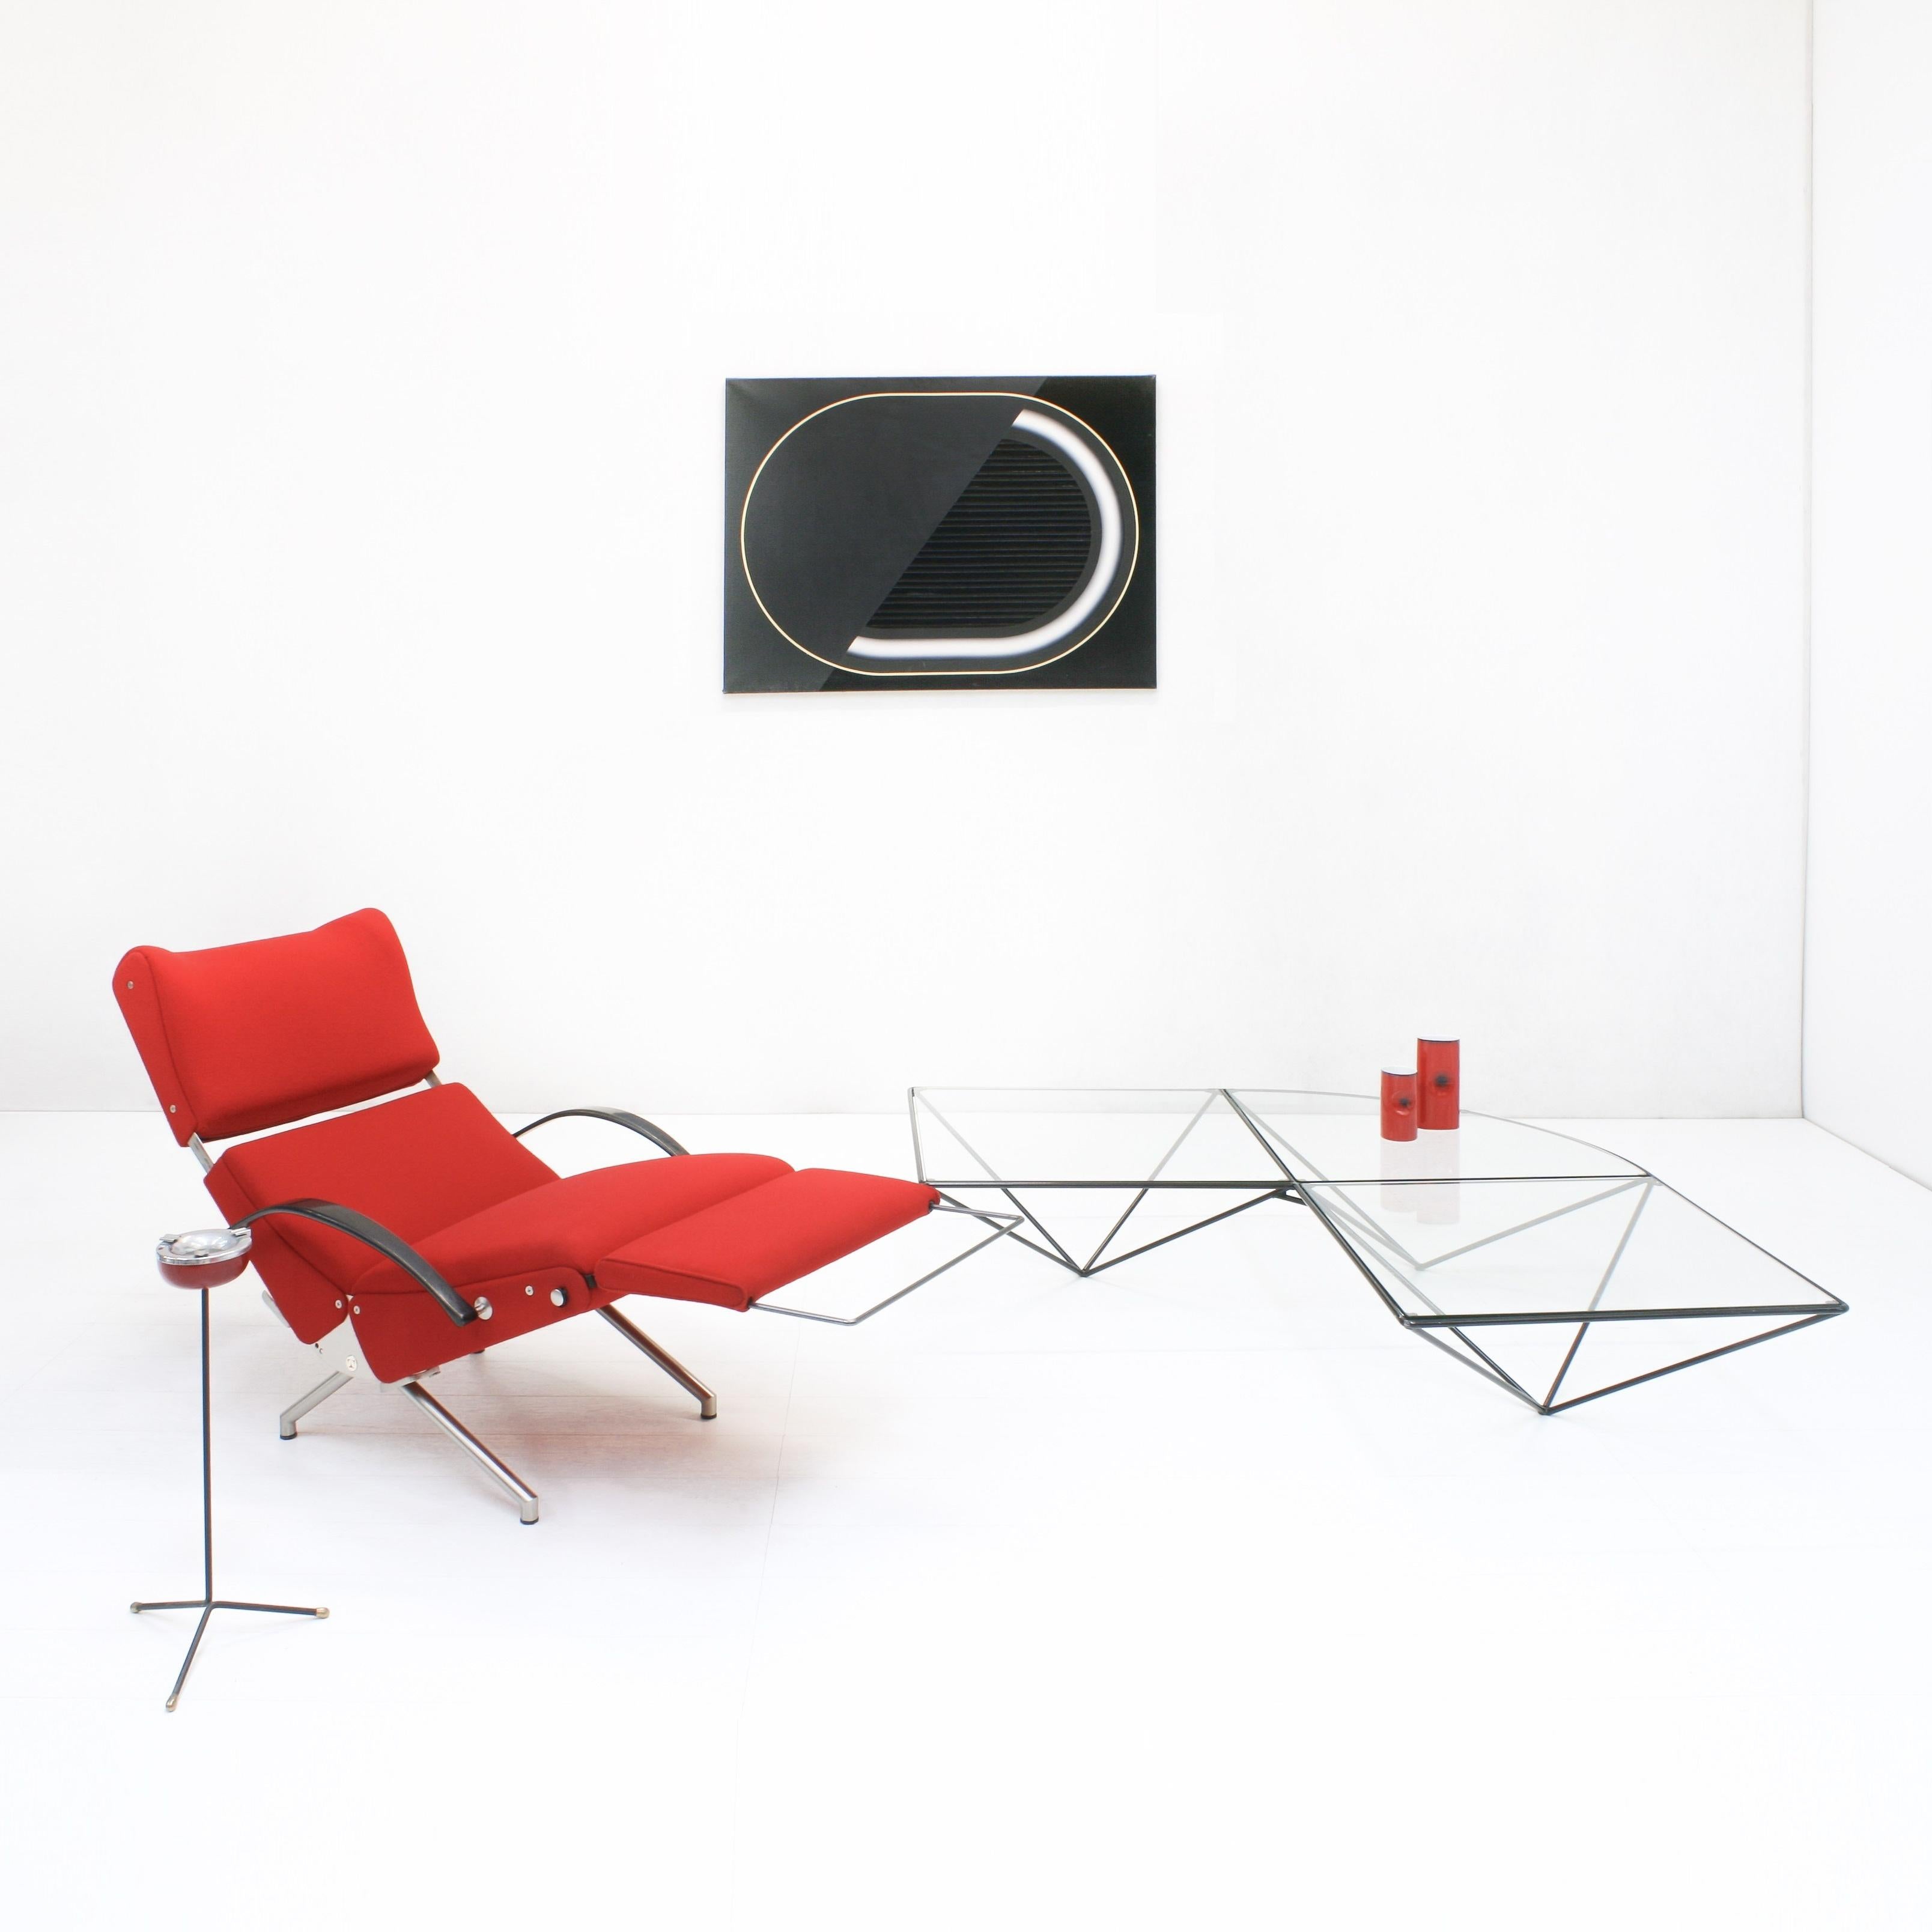 This P40 lounge chair by Osvaldo Borsani, executed in a bright red wool upholstery on a stainless steel base, is an icon from the Tecno collection and was designed in 1955.

Strong in its aesthetics and welcoming in its shapes, it conceals in its